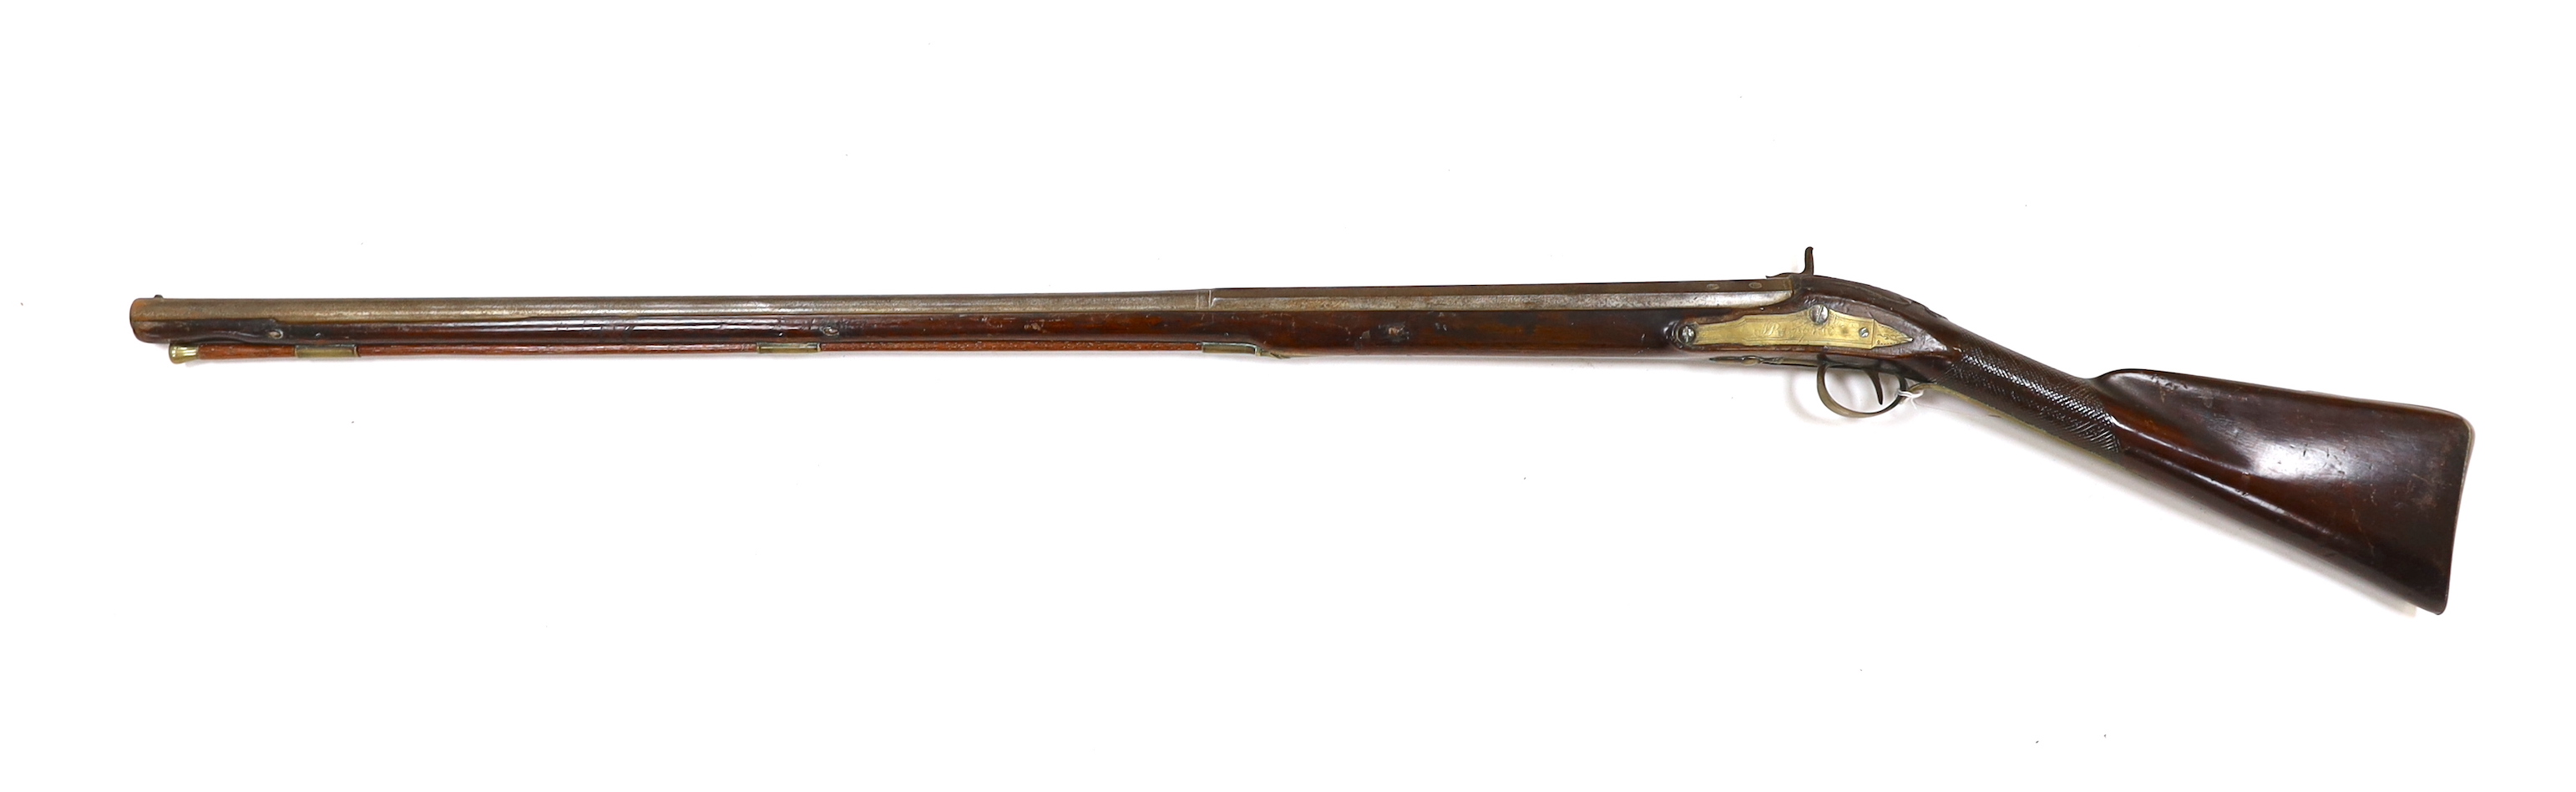 A 1786 percussion 12 bore fowling piece, converted from flintlock, with a fully stocked half octagonal barrel, London proofs, brass furniture and sideplate engraved IR 1786, chequered grip and wooden ramrod, barrel 96cm